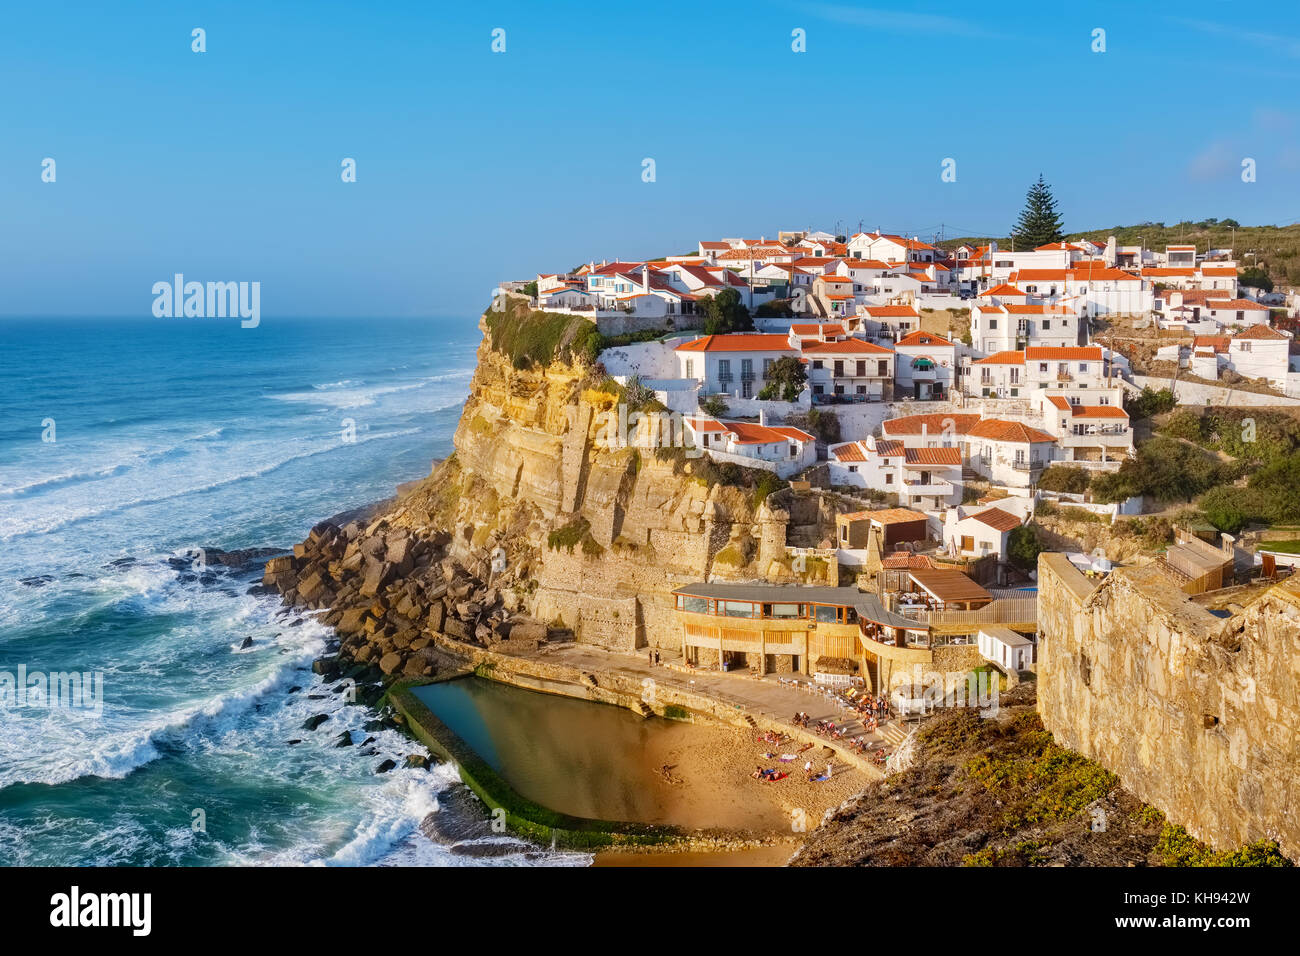 View of seaside town Azenhas do Mar. Municipality of Sintra, Portugal Stock Photo